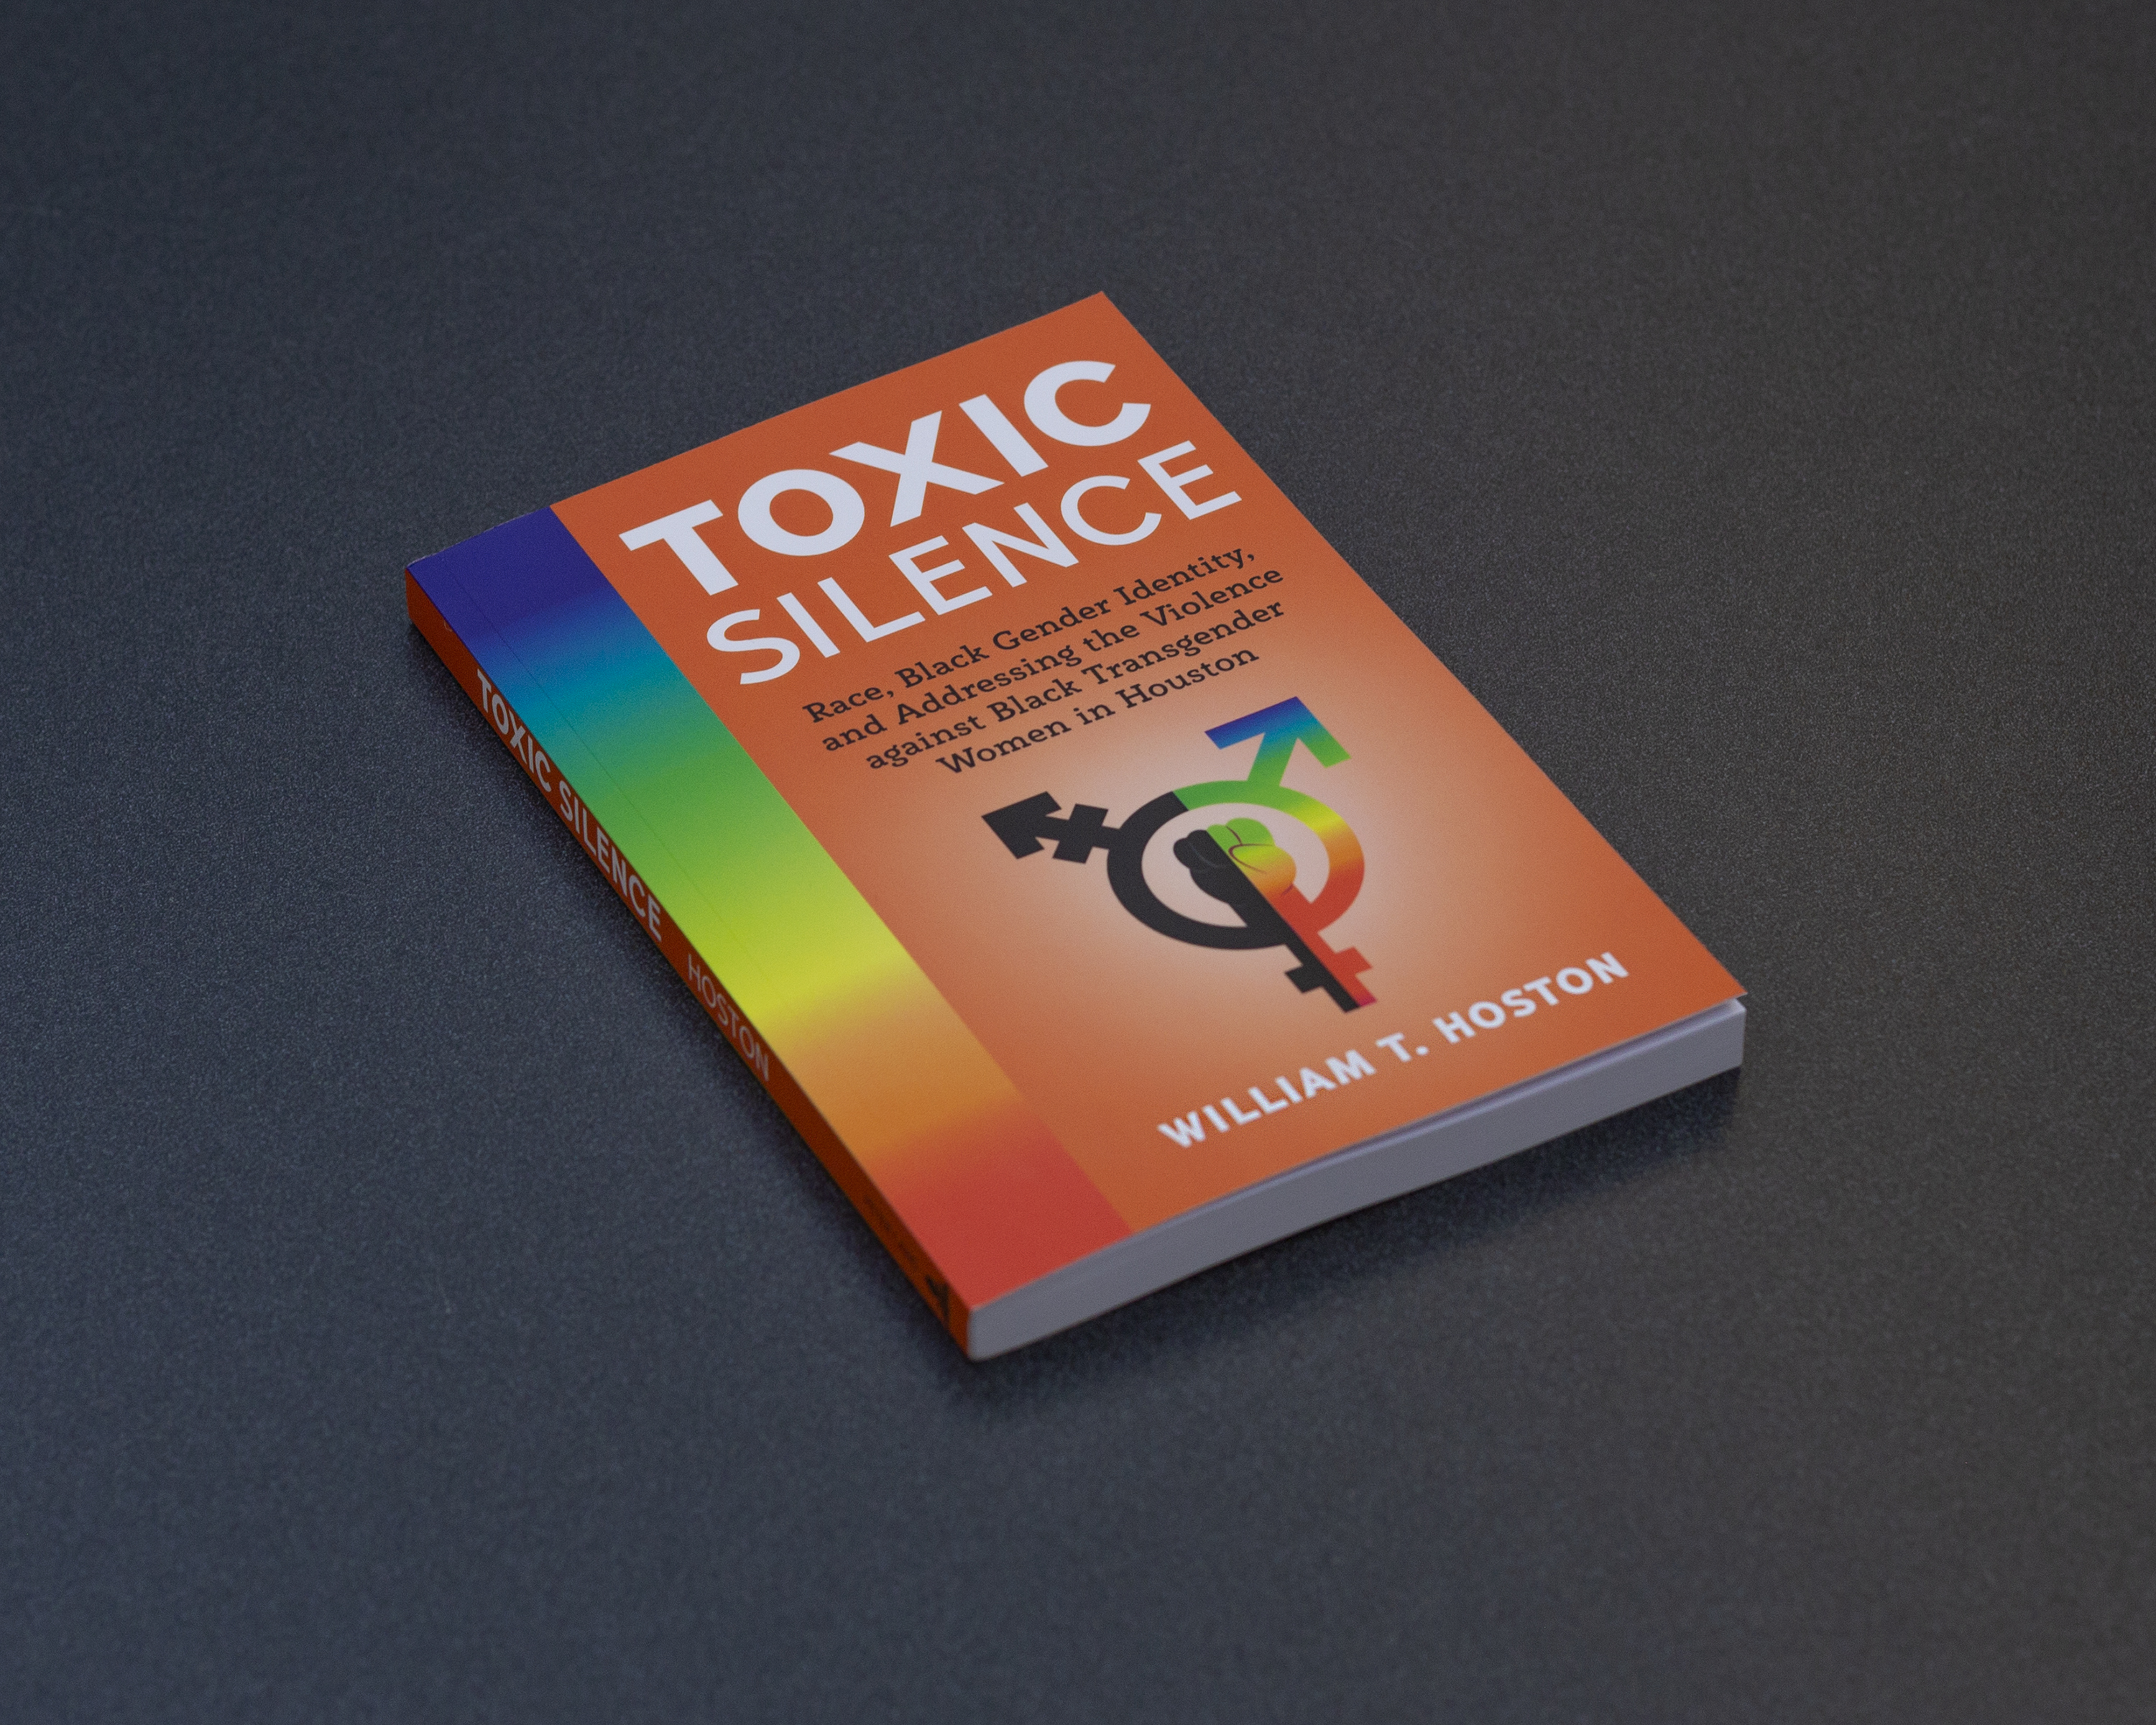 PHOTO: "Toxic Silence" book by UHCL professor William T. Hoston.